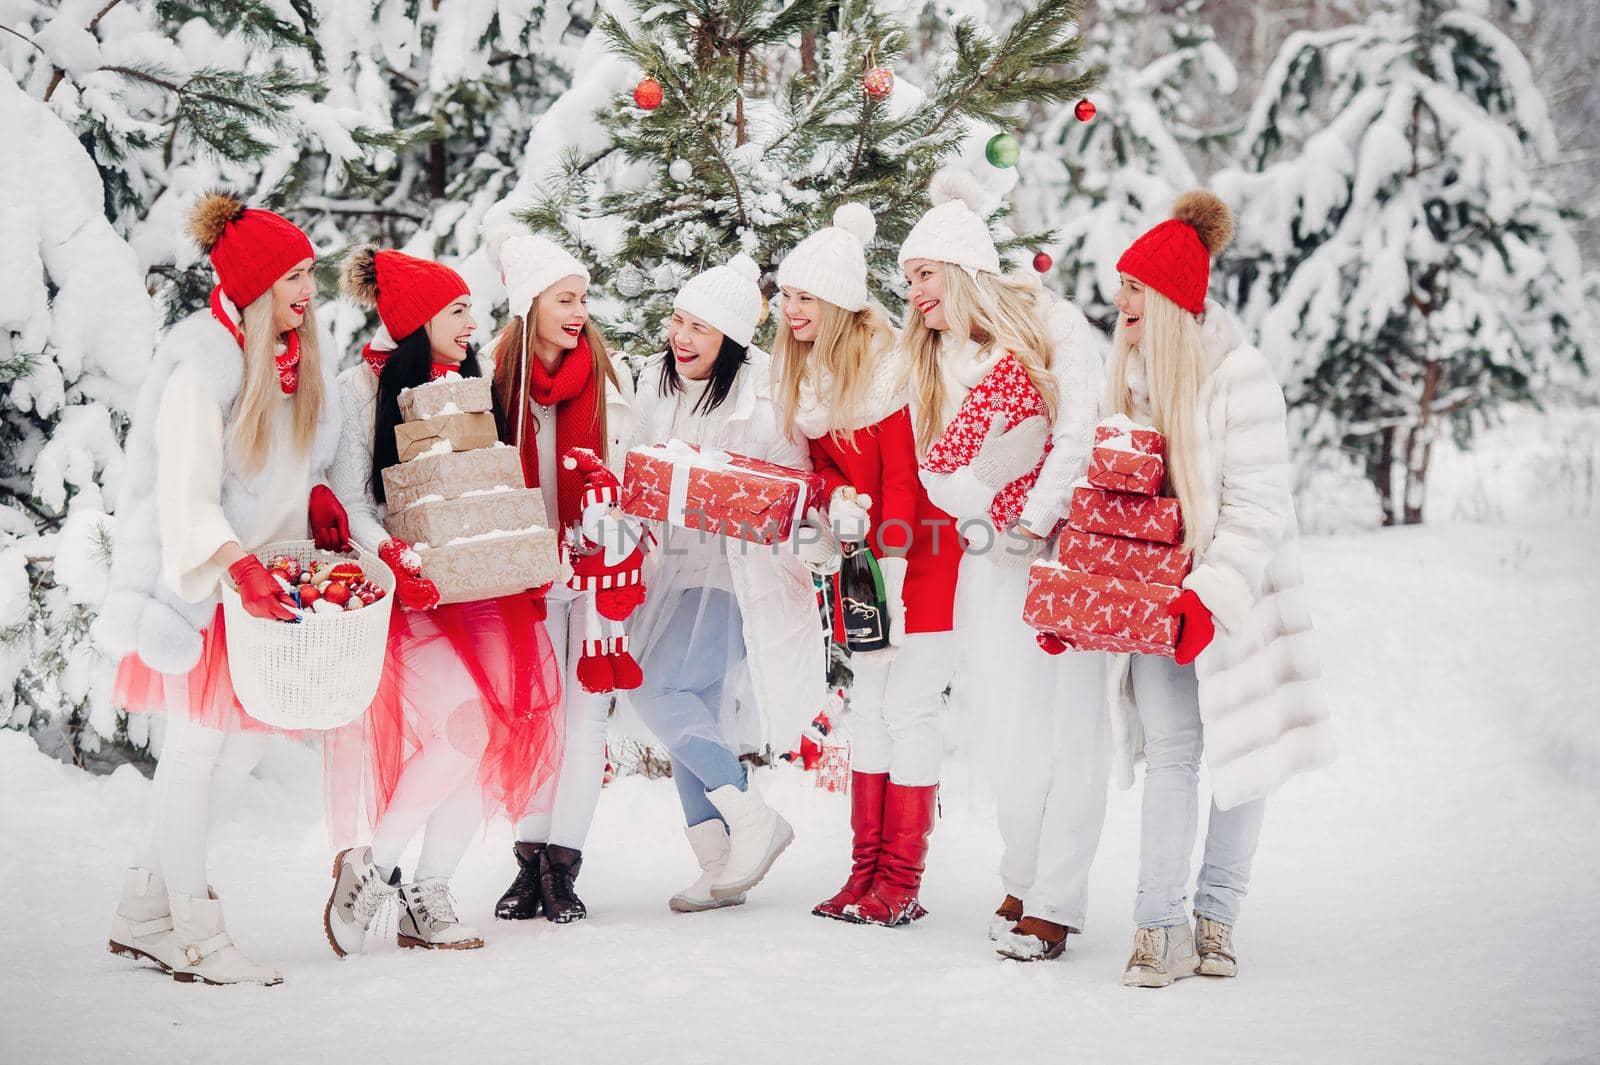 A large group of girls with Christmas gifts in their hands standing in the winter forest.Girls in red and white clothes with Christmas gifts in the snowy forest.